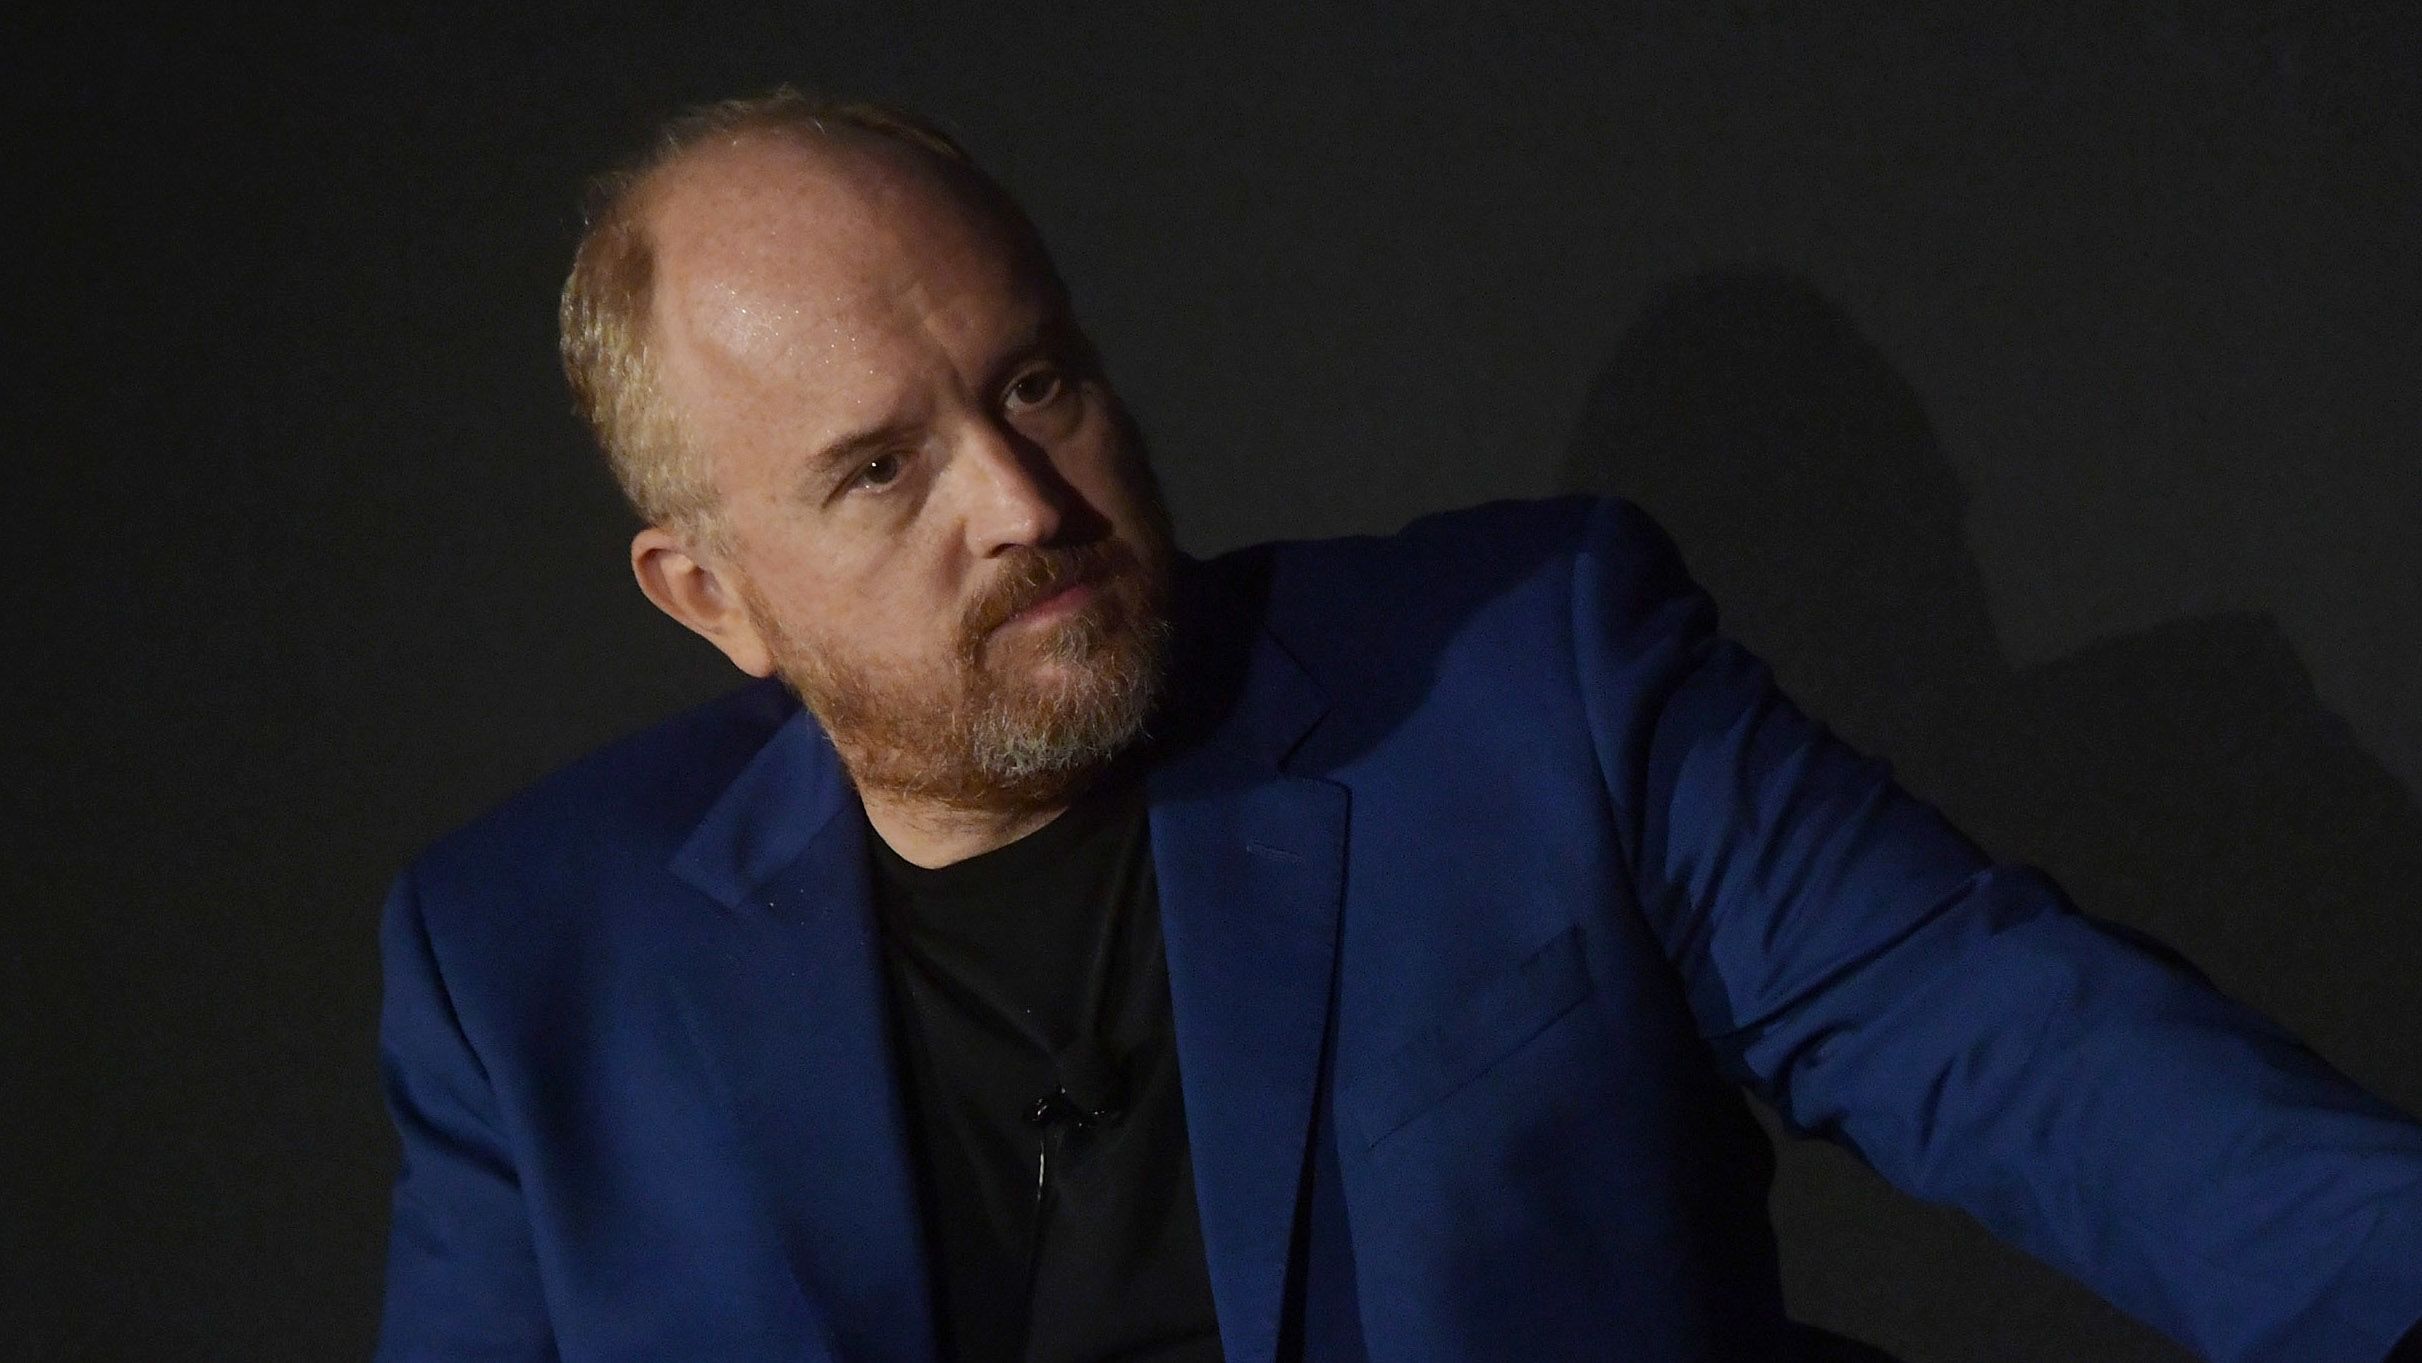 Feminist Perspectives on the Apology of Louis CK and the #MeToo and  #TimesUp Movements - Heleana Theixos, 2018